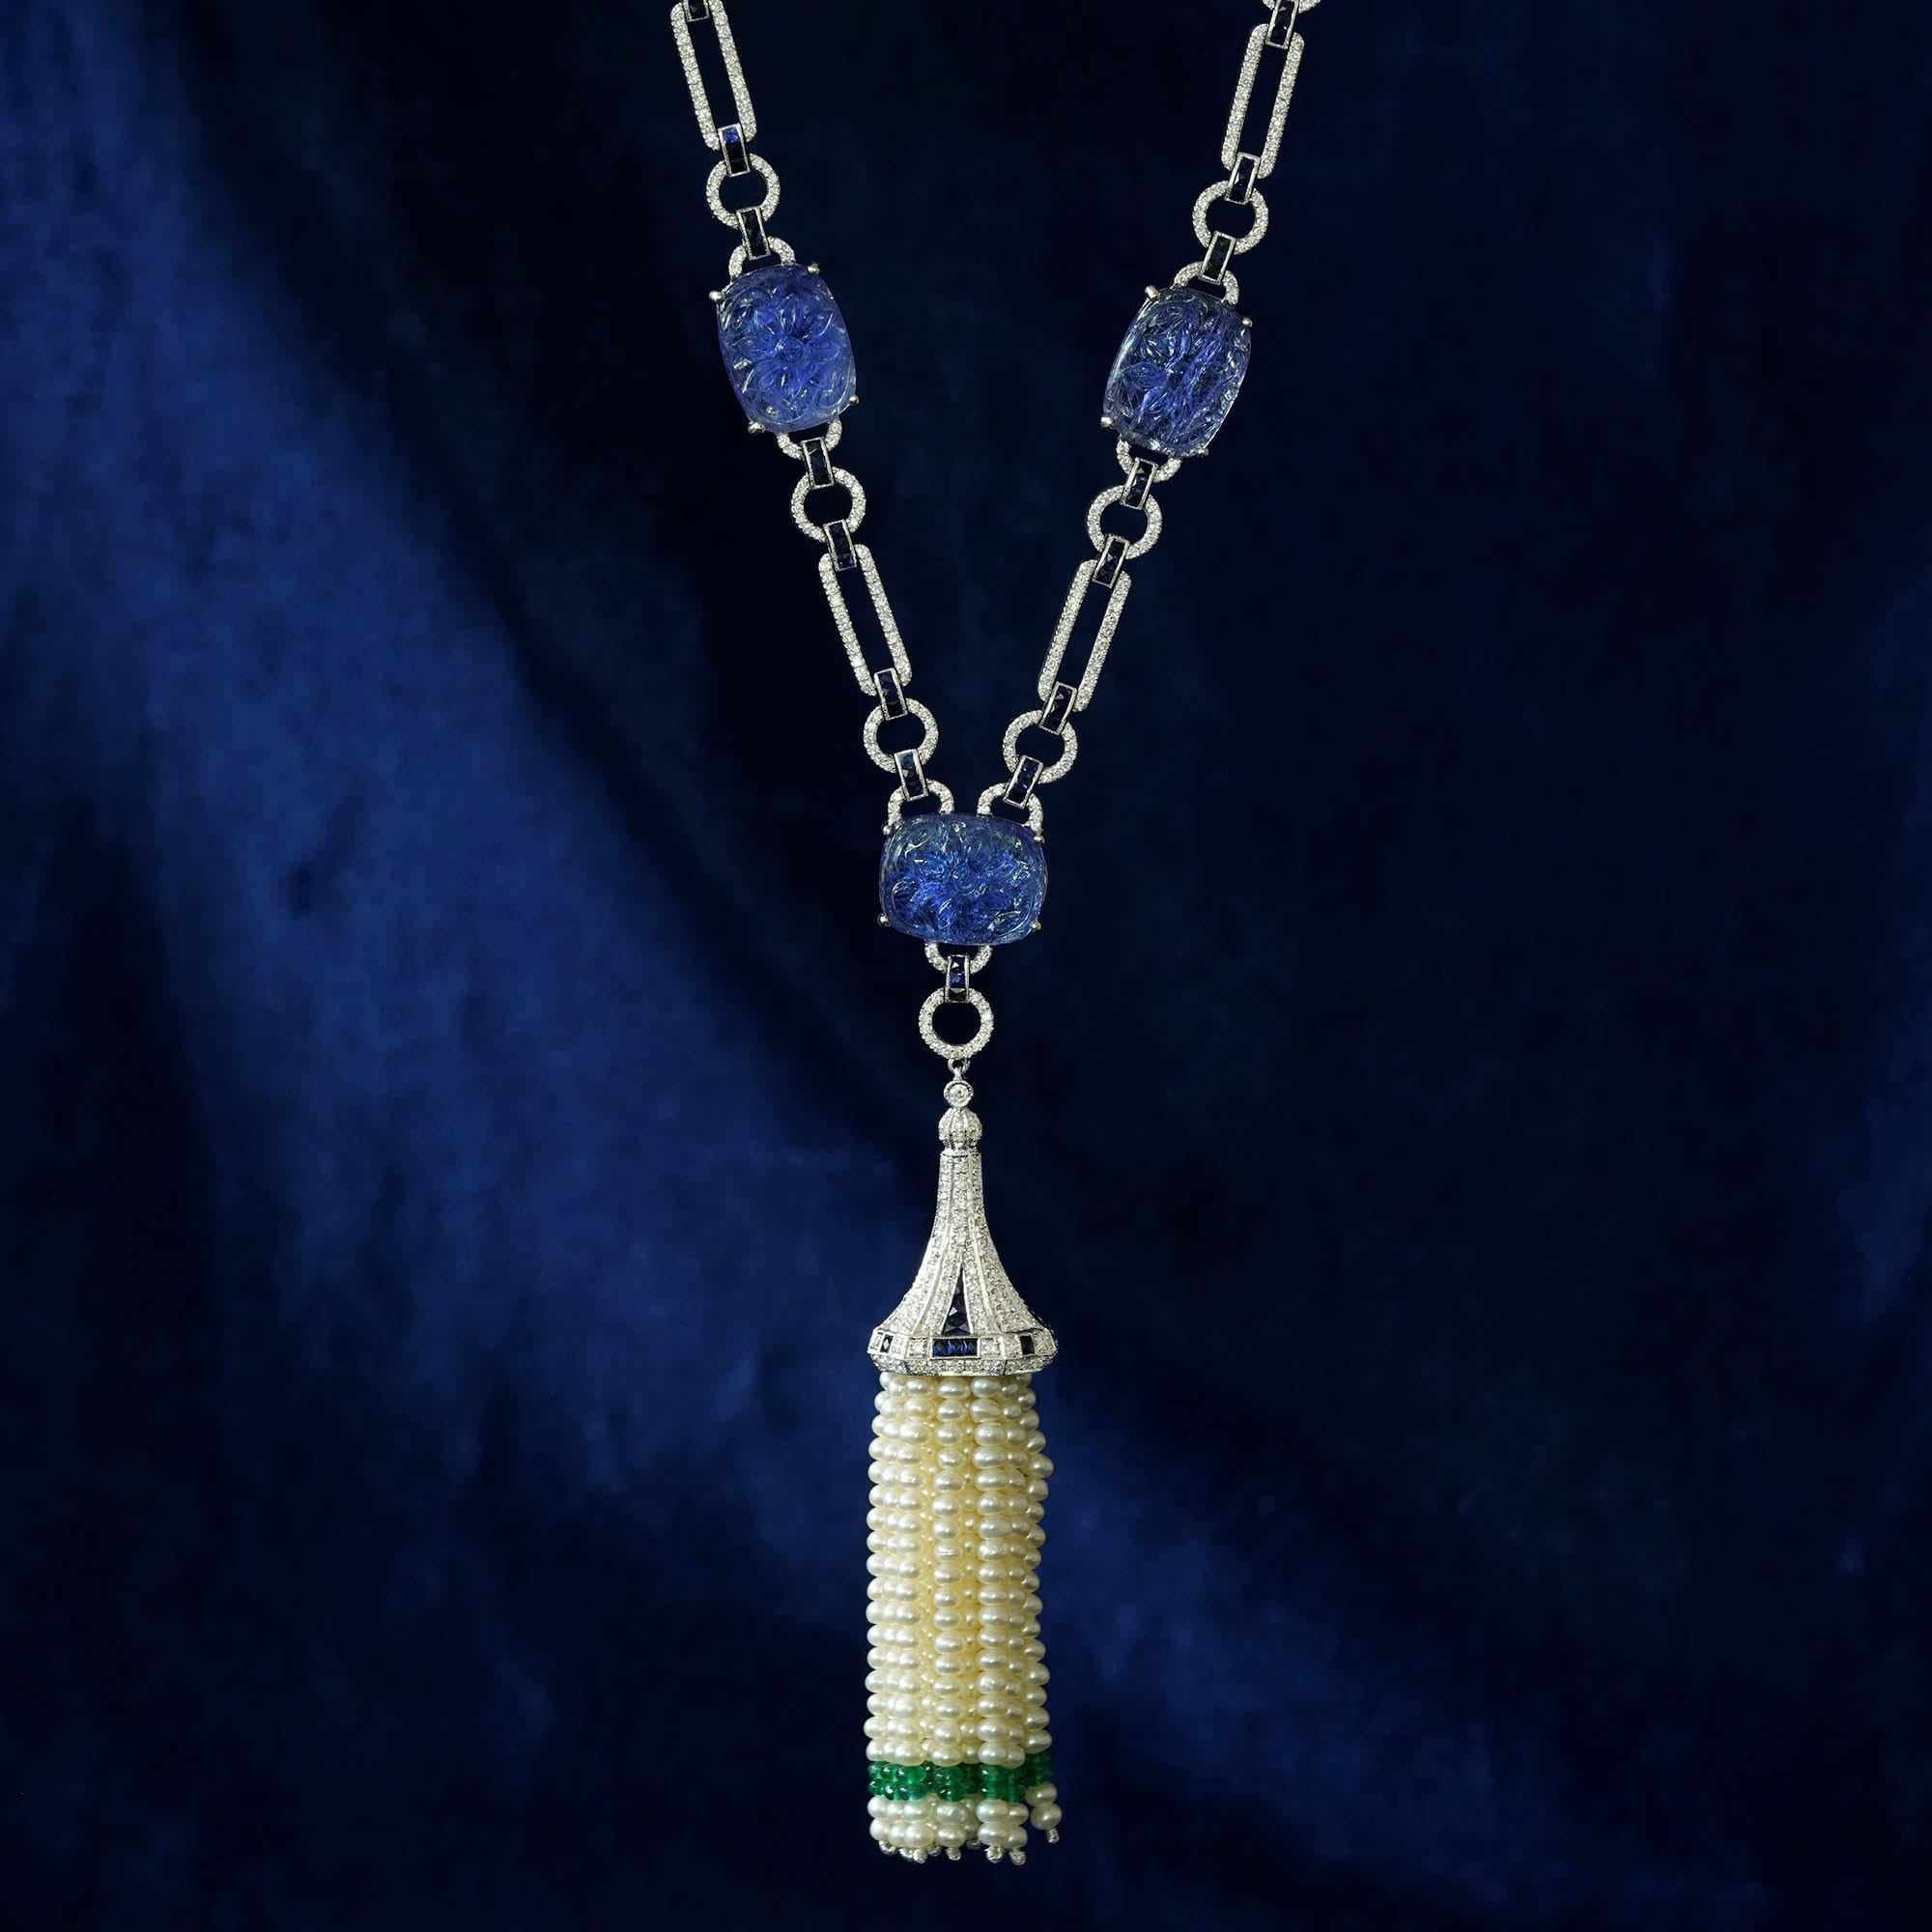 This beautiful necklace features freshwater pearls and bead emerald that hold a gorgeous tassel. Tassel charm is made of diamonds and French cut sapphires, beautifully hanging from cushion-cut tanzanite’s, hand carved with flower design. All are